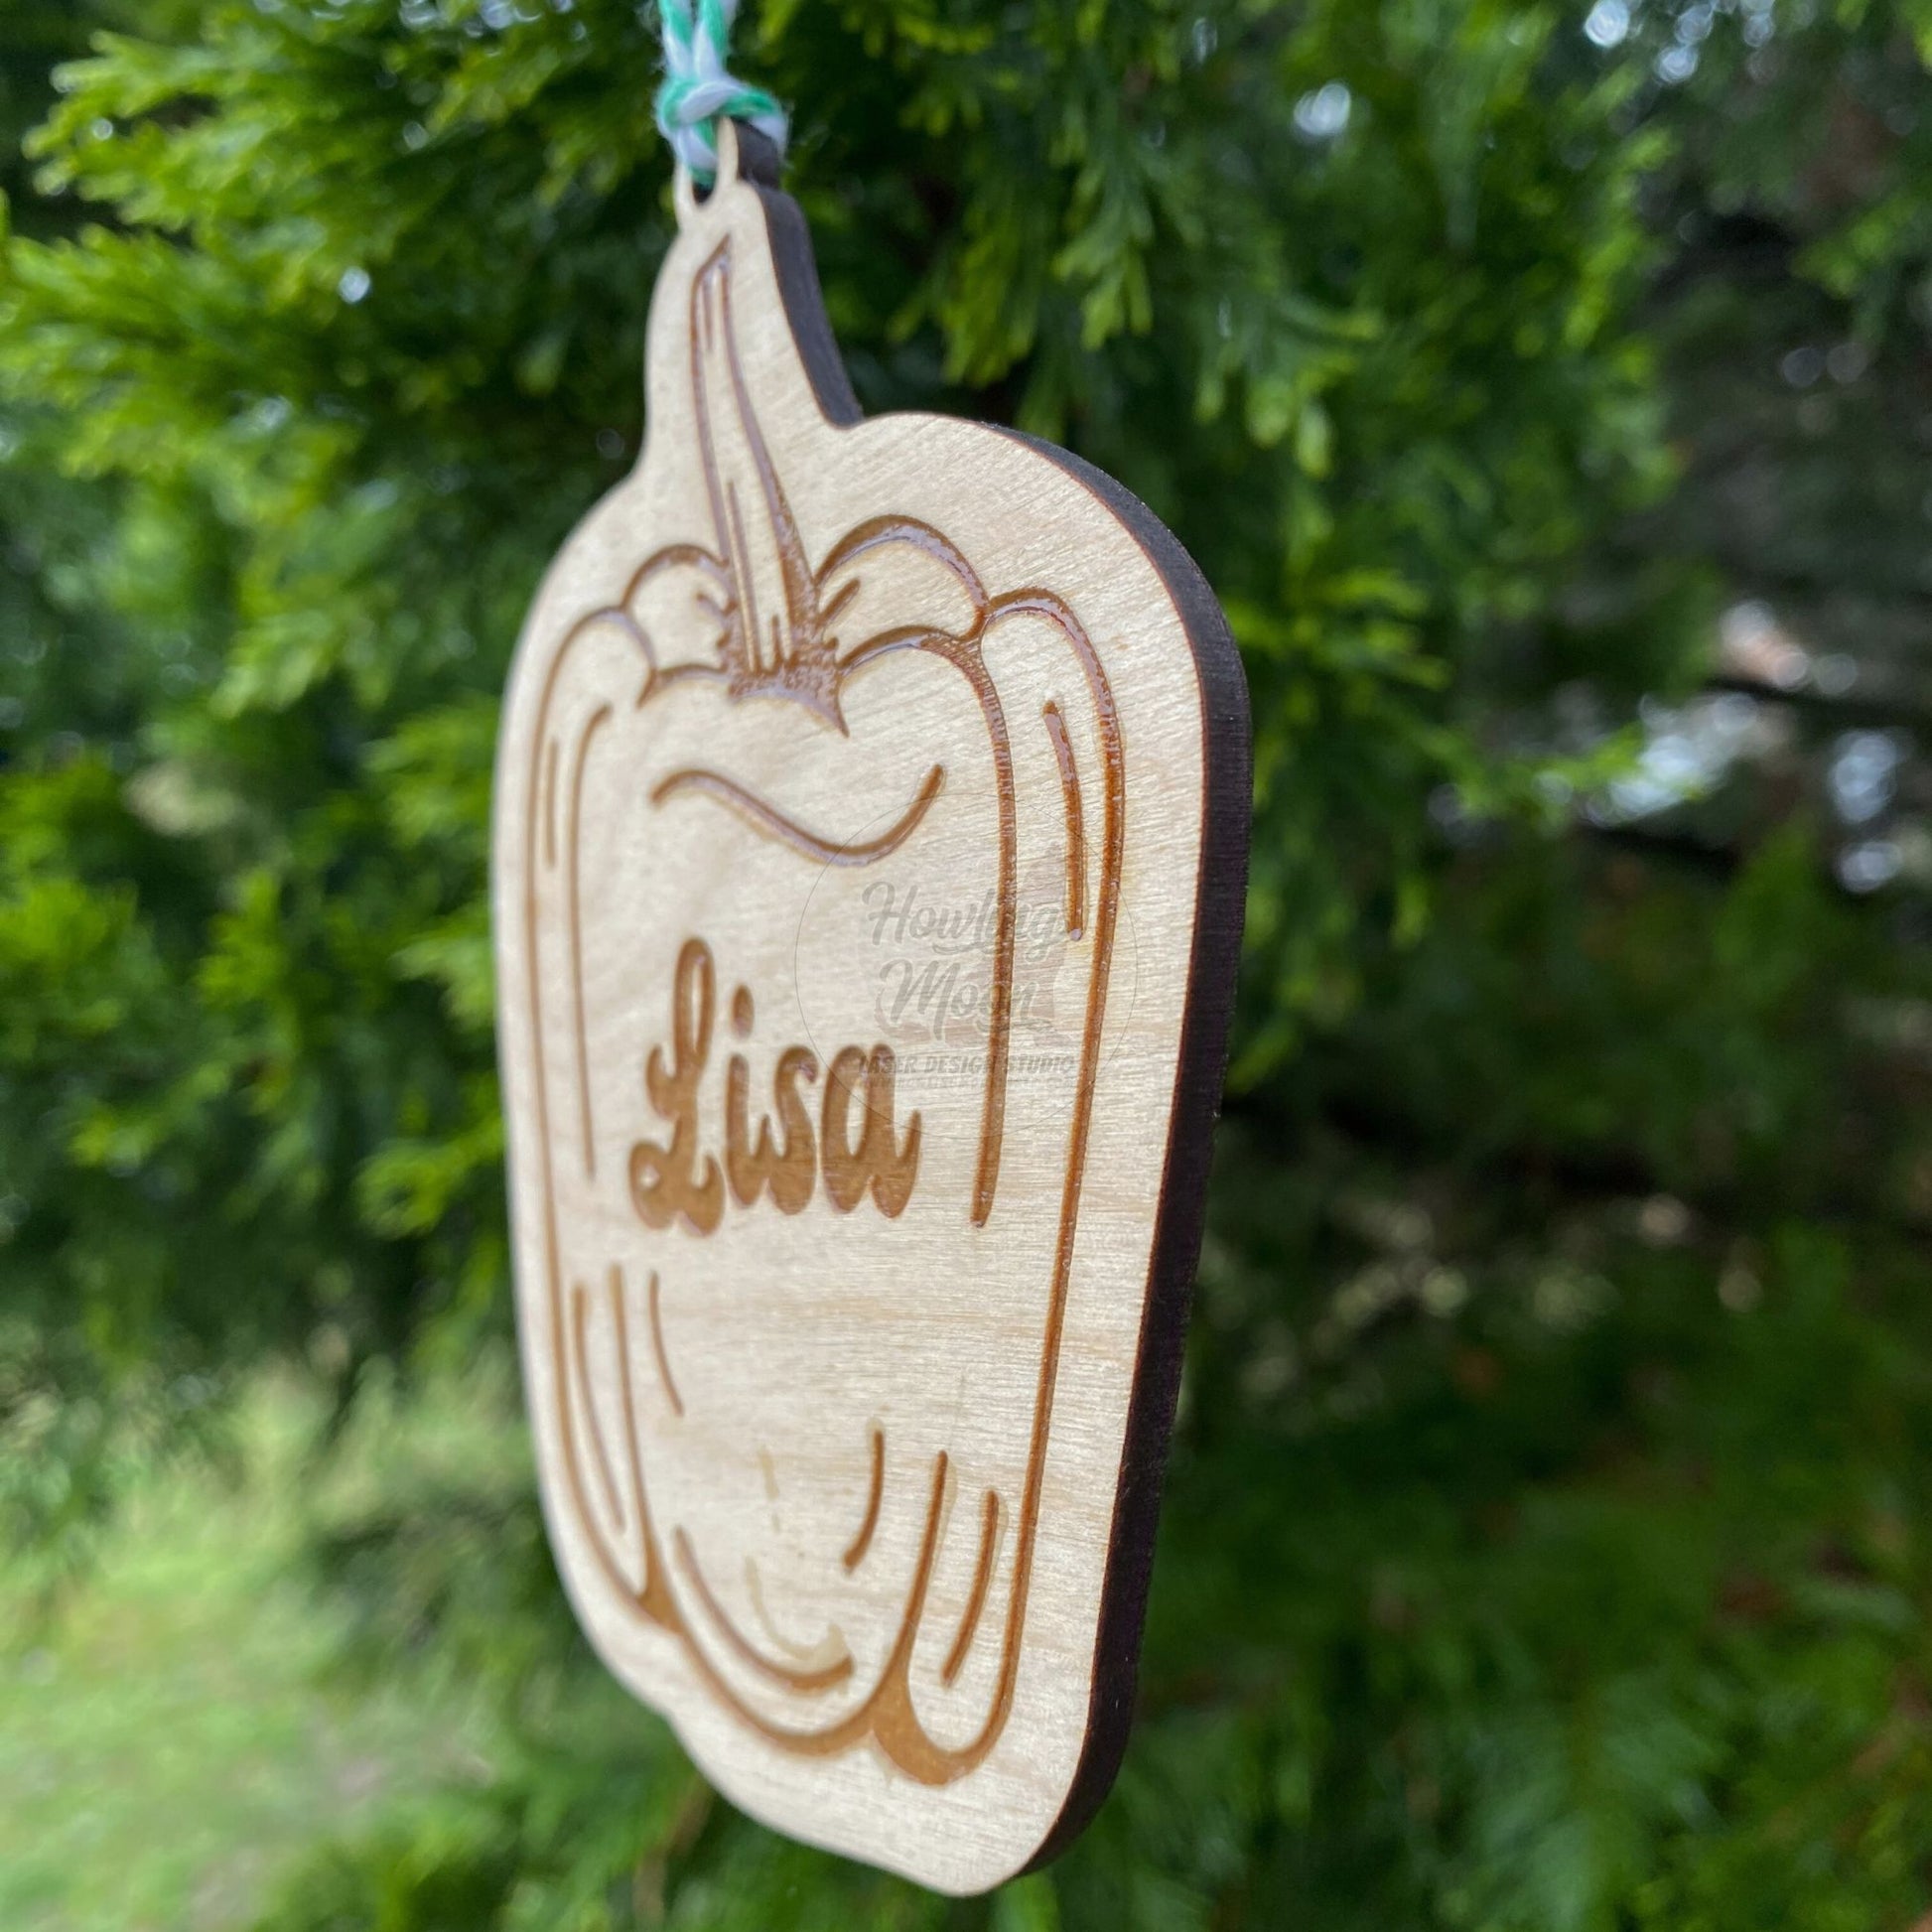 Right side view of Personalized bell pepper ornaments handcrafted from natural wood made in Virginia USA by Howling Moon Laser Design Studio.